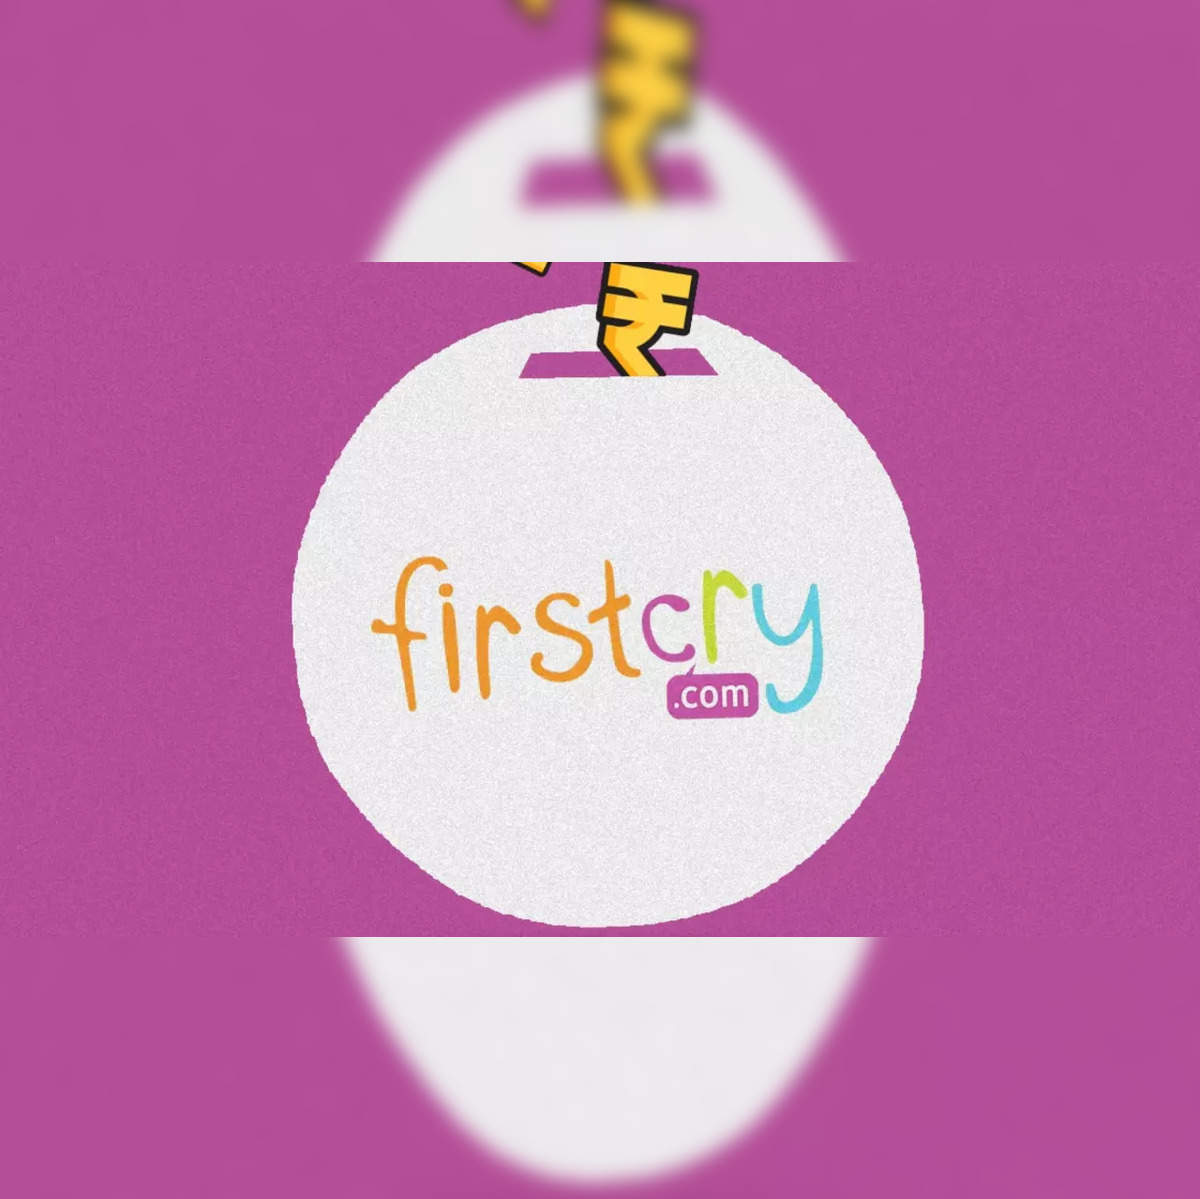 Firstcry Images :: Photos, videos, logos, illustrations and branding ::  Behance